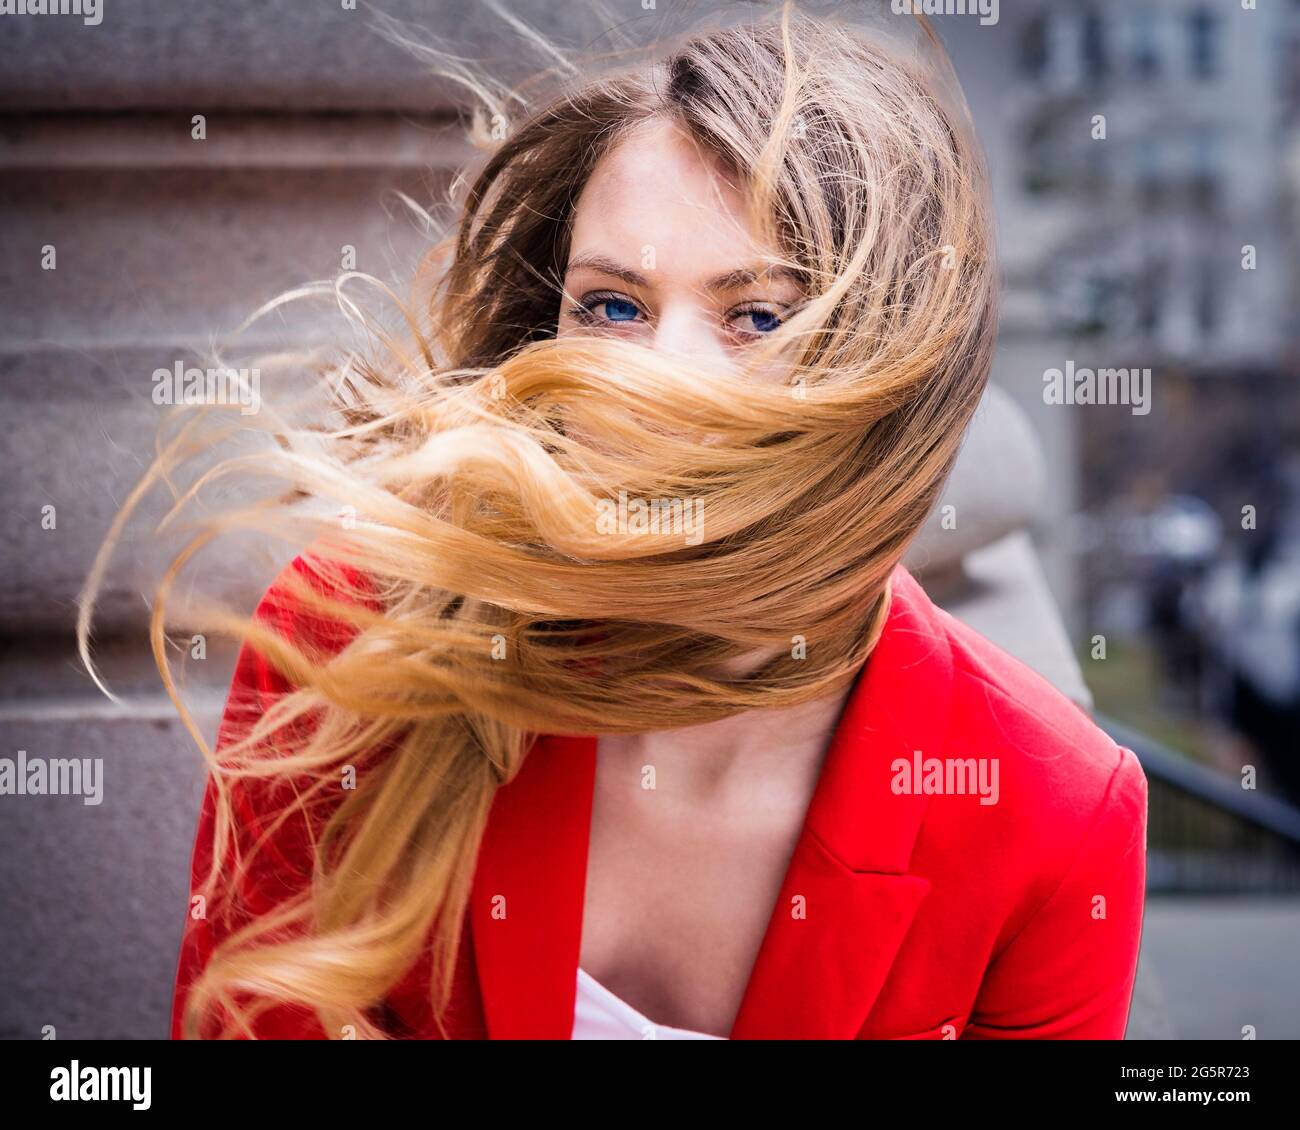 Windy Day. Dressing in red, a young woman with long blonde hair is on a windy day. Stock Photo